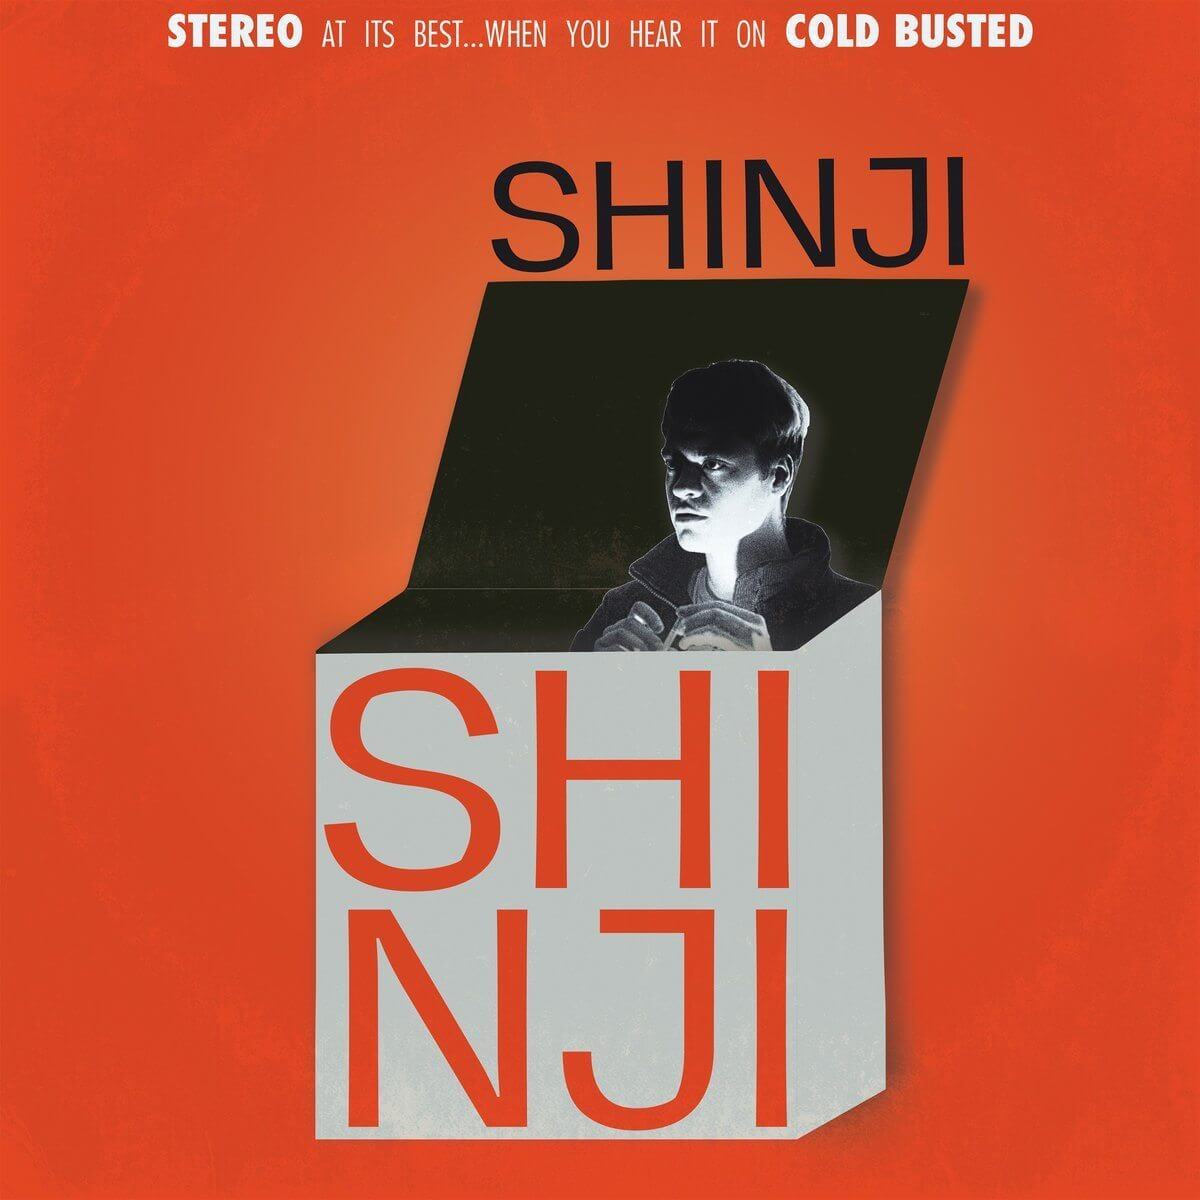 Stream 🫧SHINJI🫧 music  Listen to songs, albums, playlists for